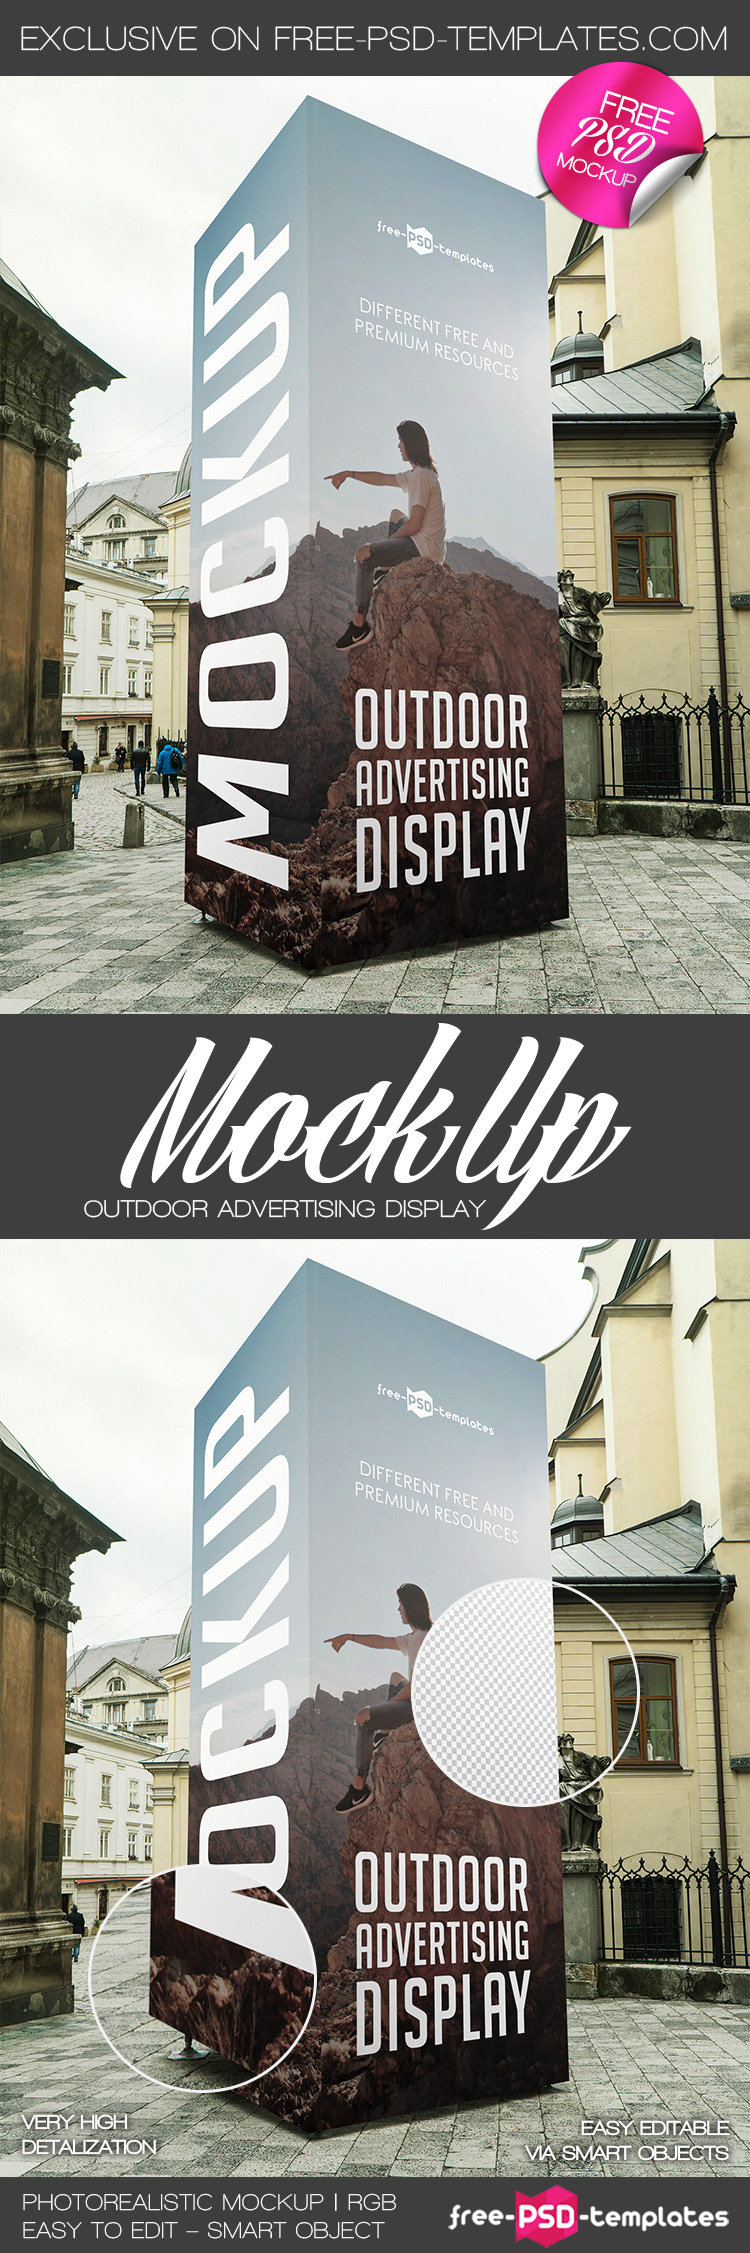 Download Free Outdoor Advertising Display Mock-up in PSD | Free PSD ...